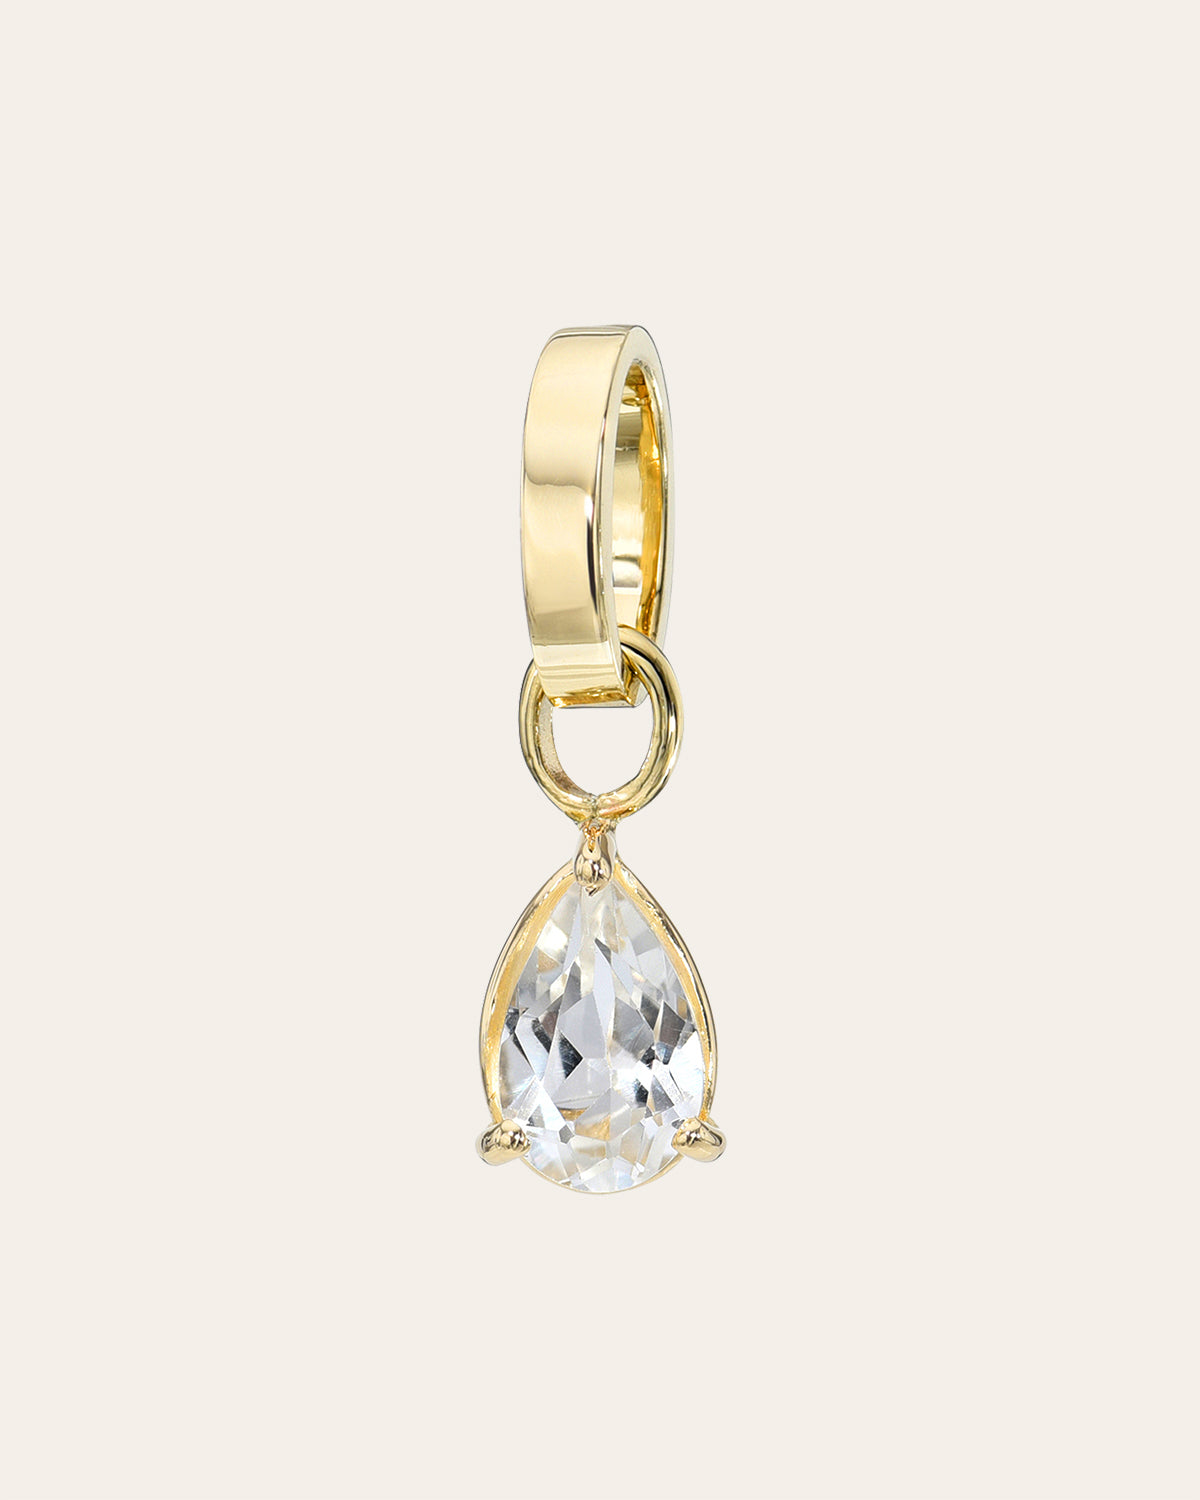 14K Gold Heirloom Charm with White Topaz Pear